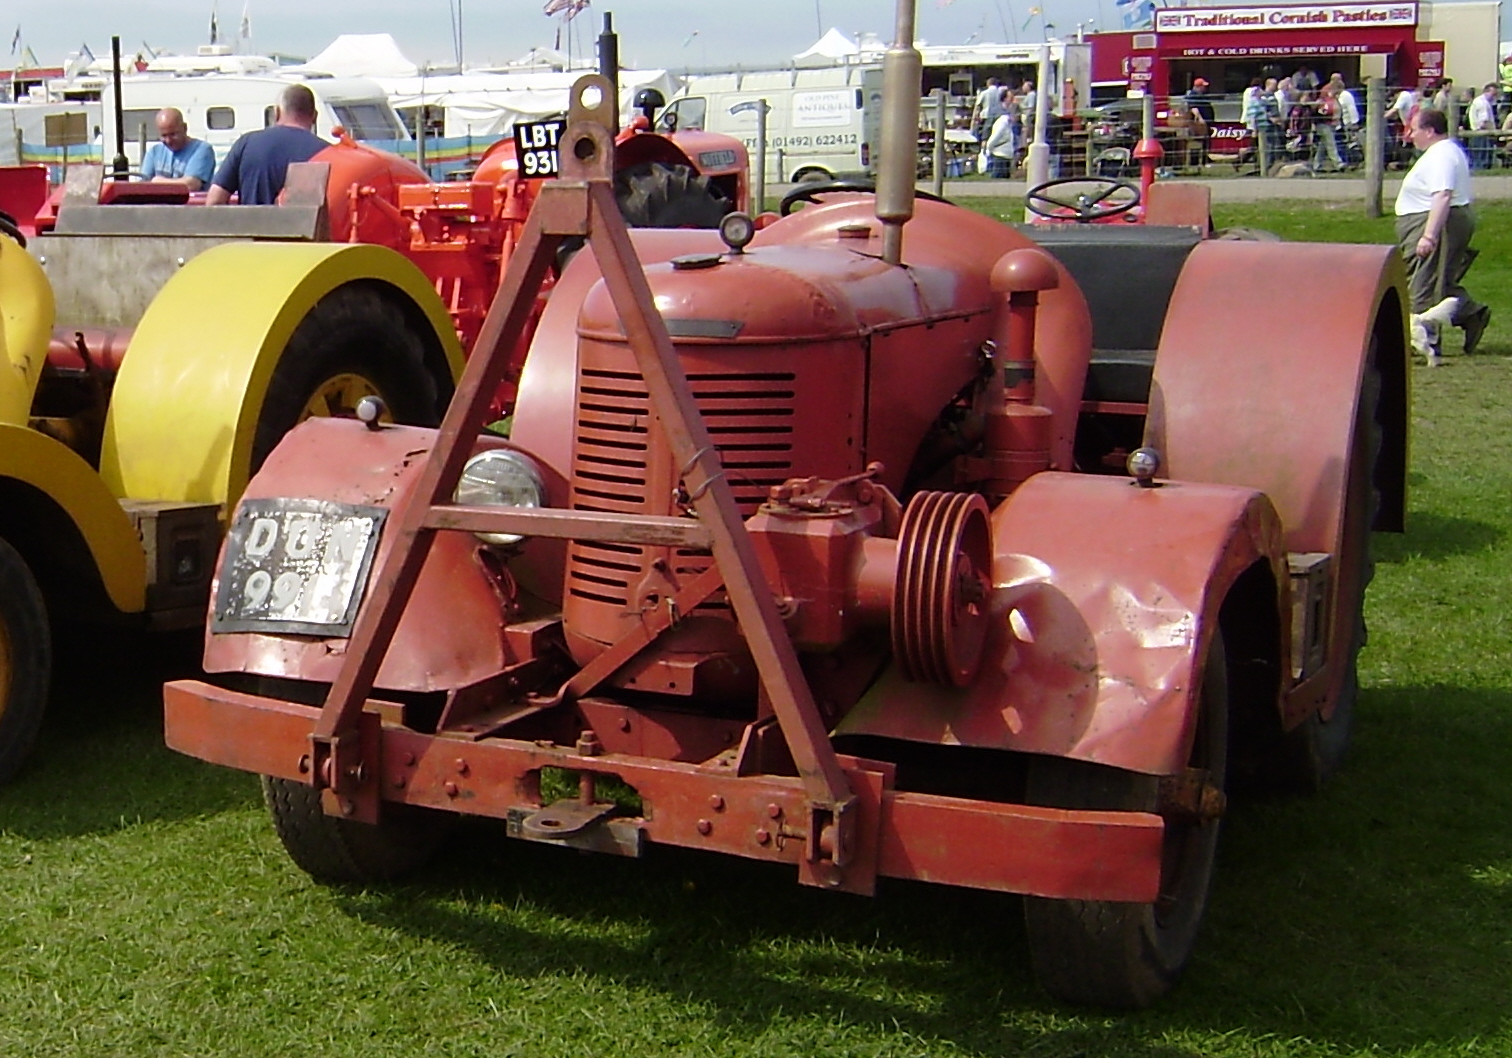 David Brown Tractor Mk2 Photo Gallery: Photo #07 out of 9, Image ...